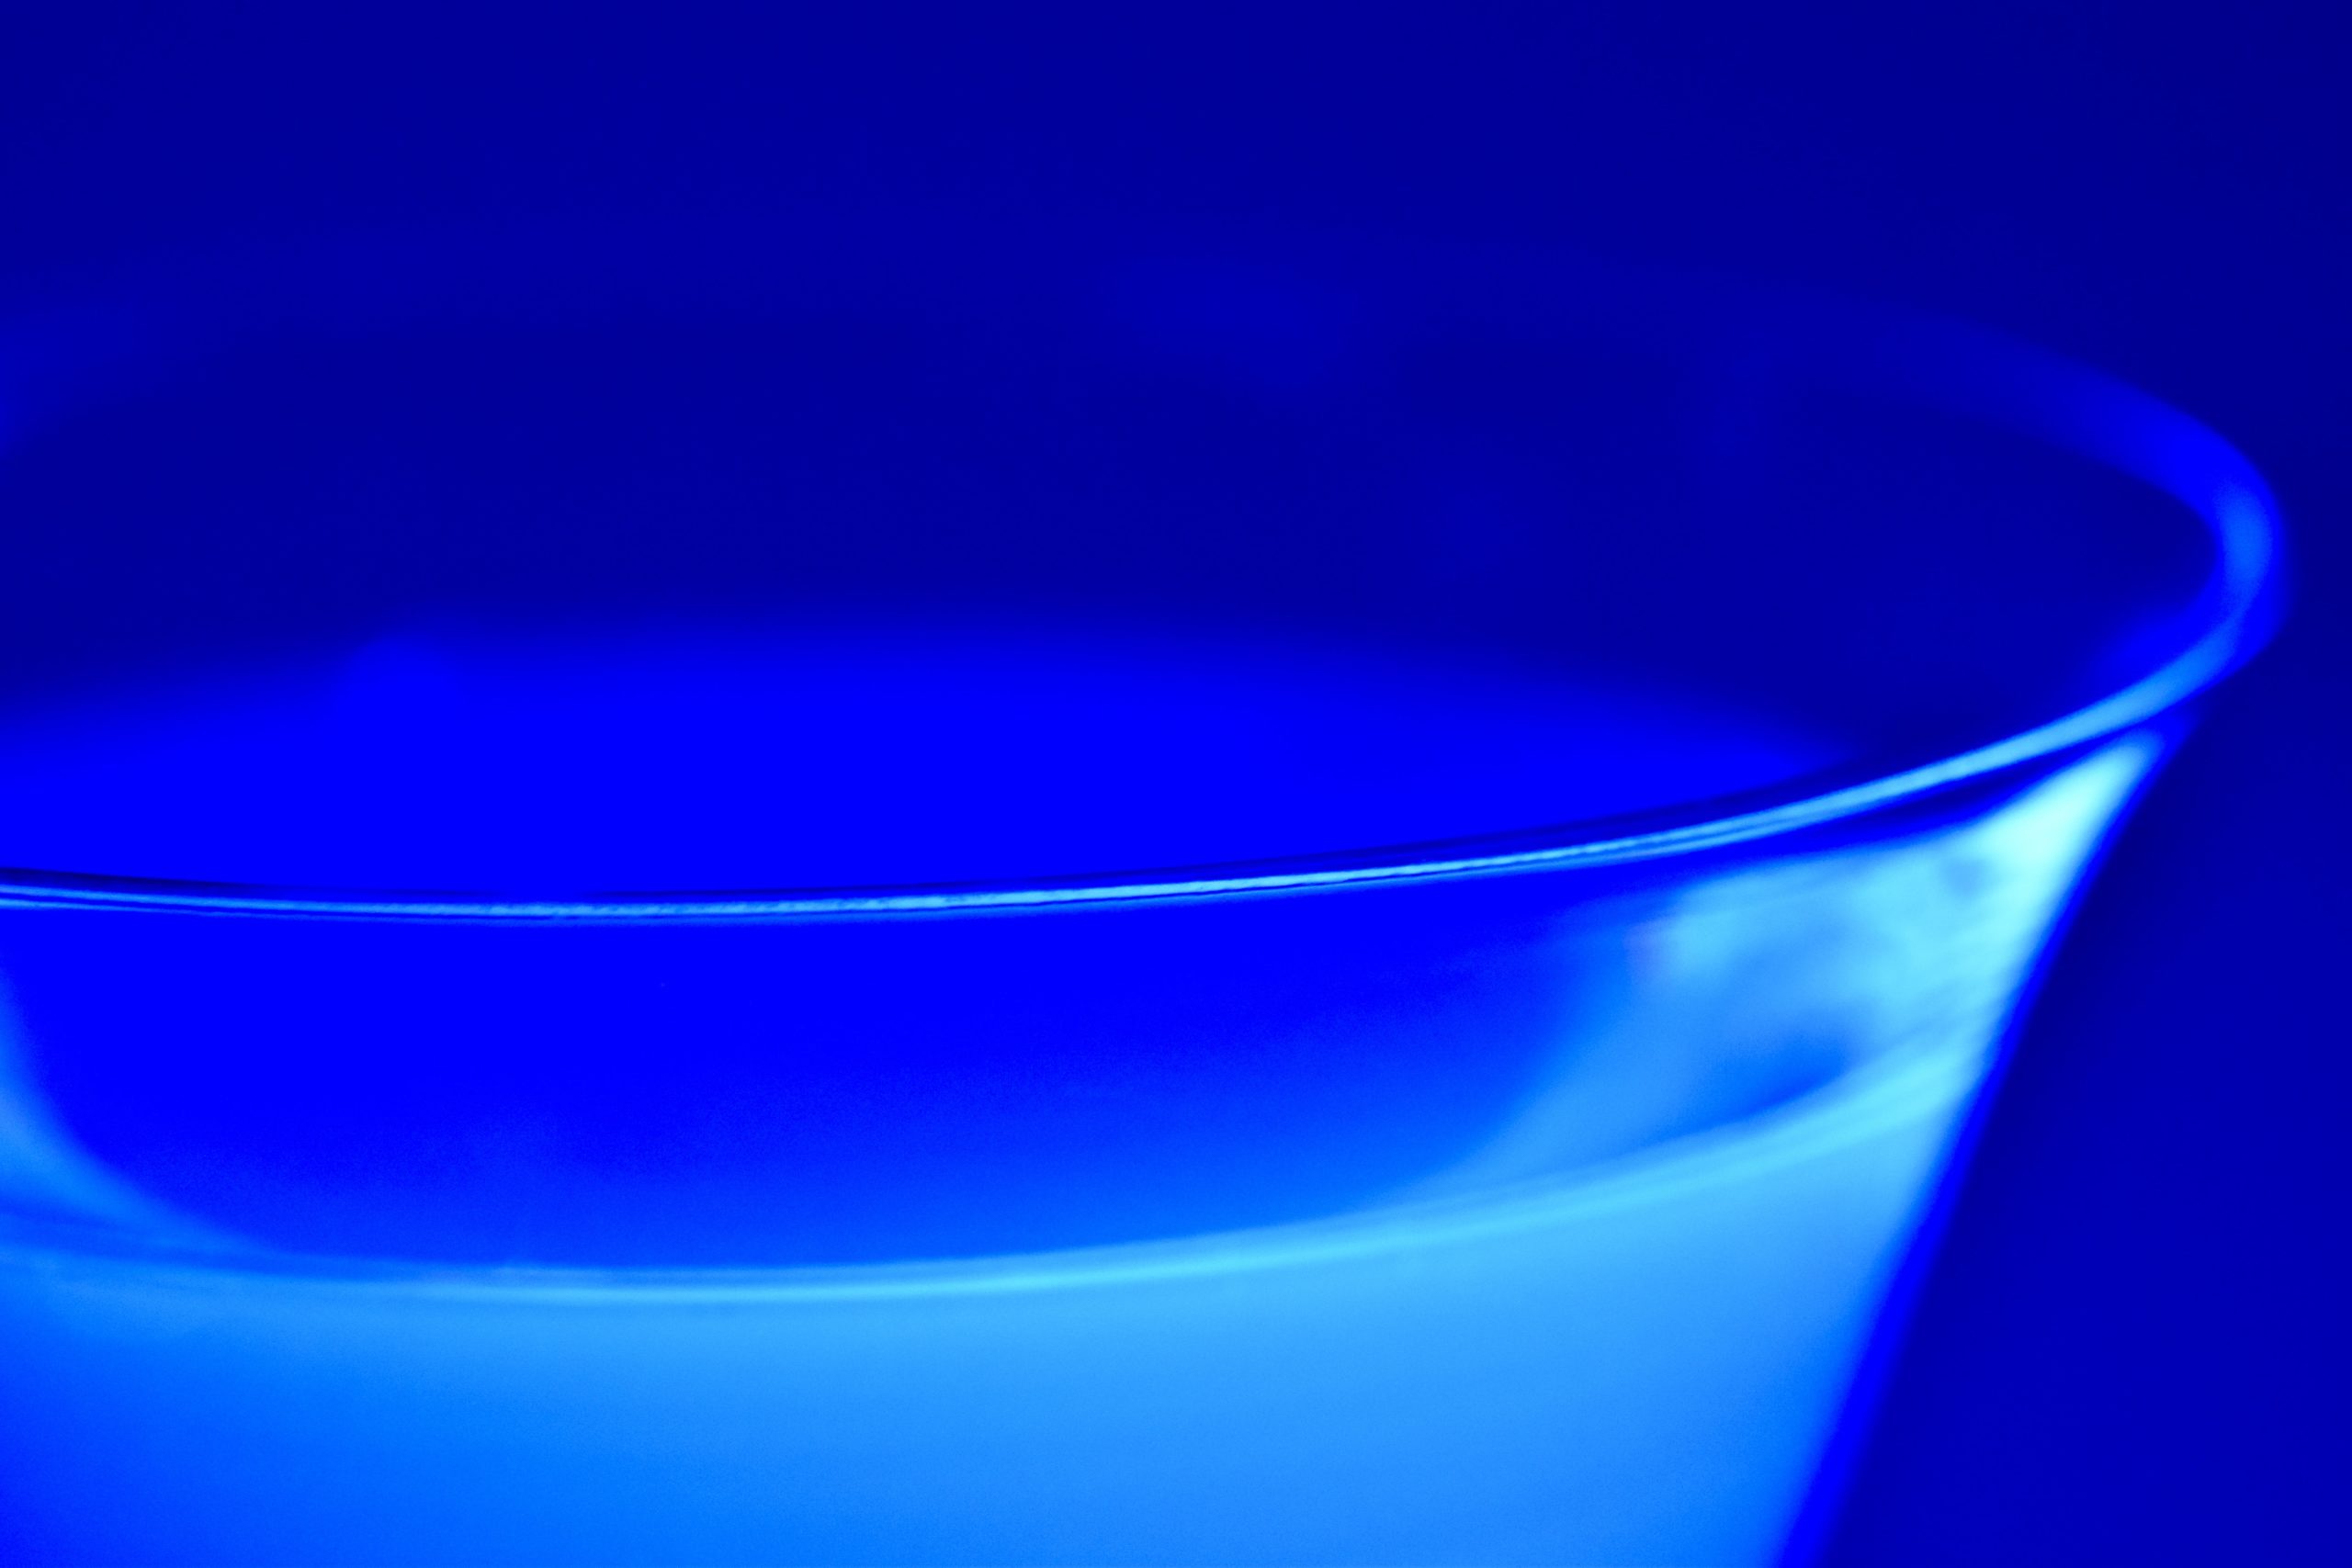 A brief history of UV light and its importance